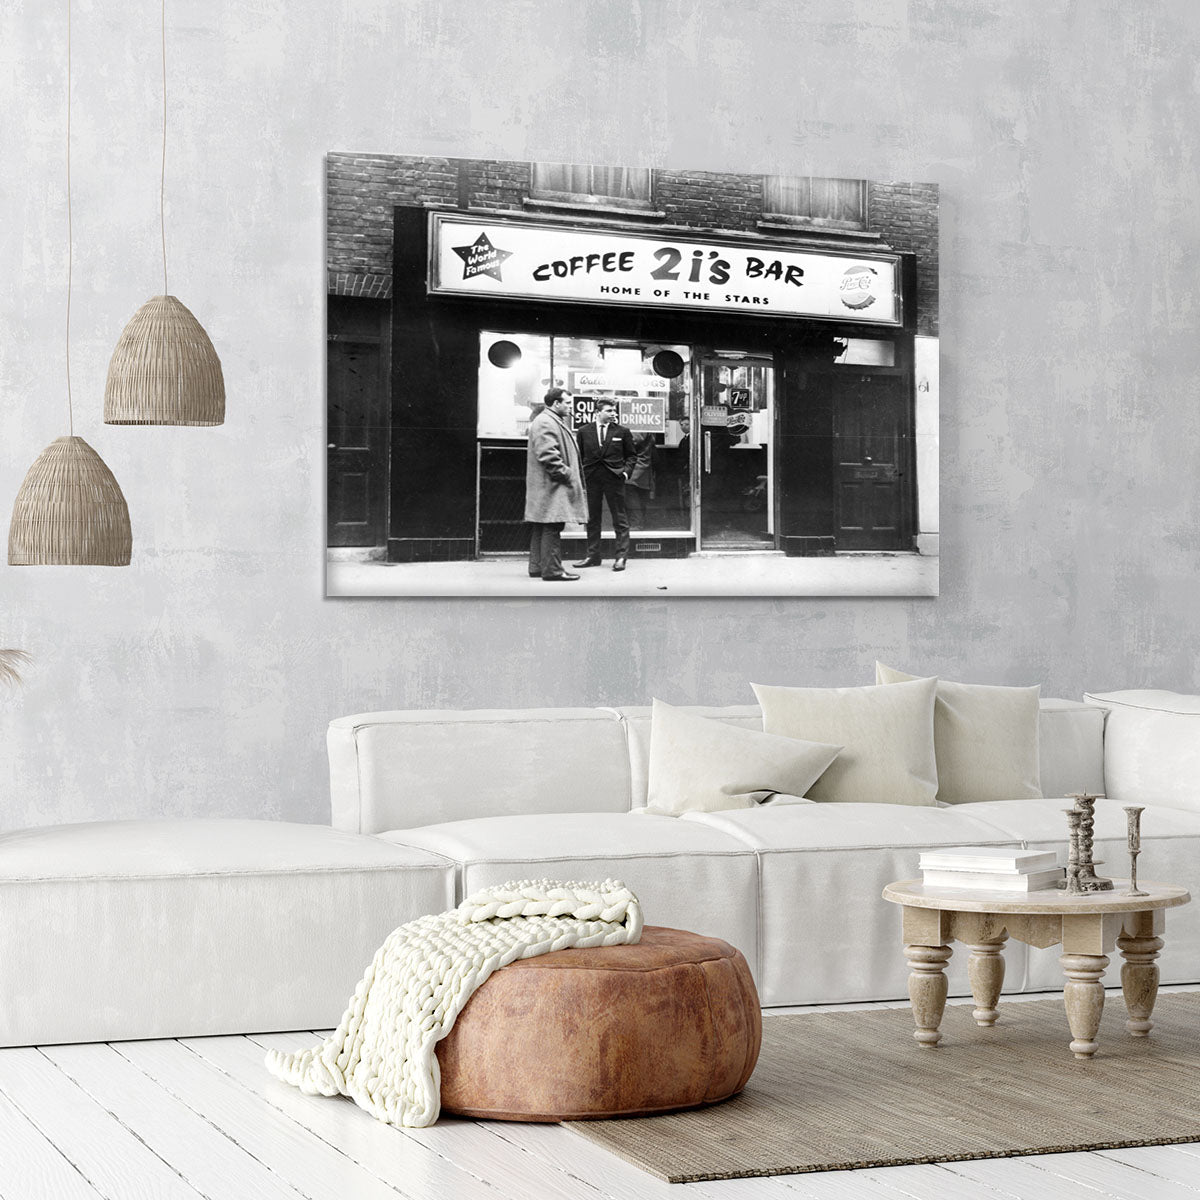 2is Coffee Bar in Old Compton Street Soho 1963 Canvas Print or Poster - Canvas Art Rocks - 6